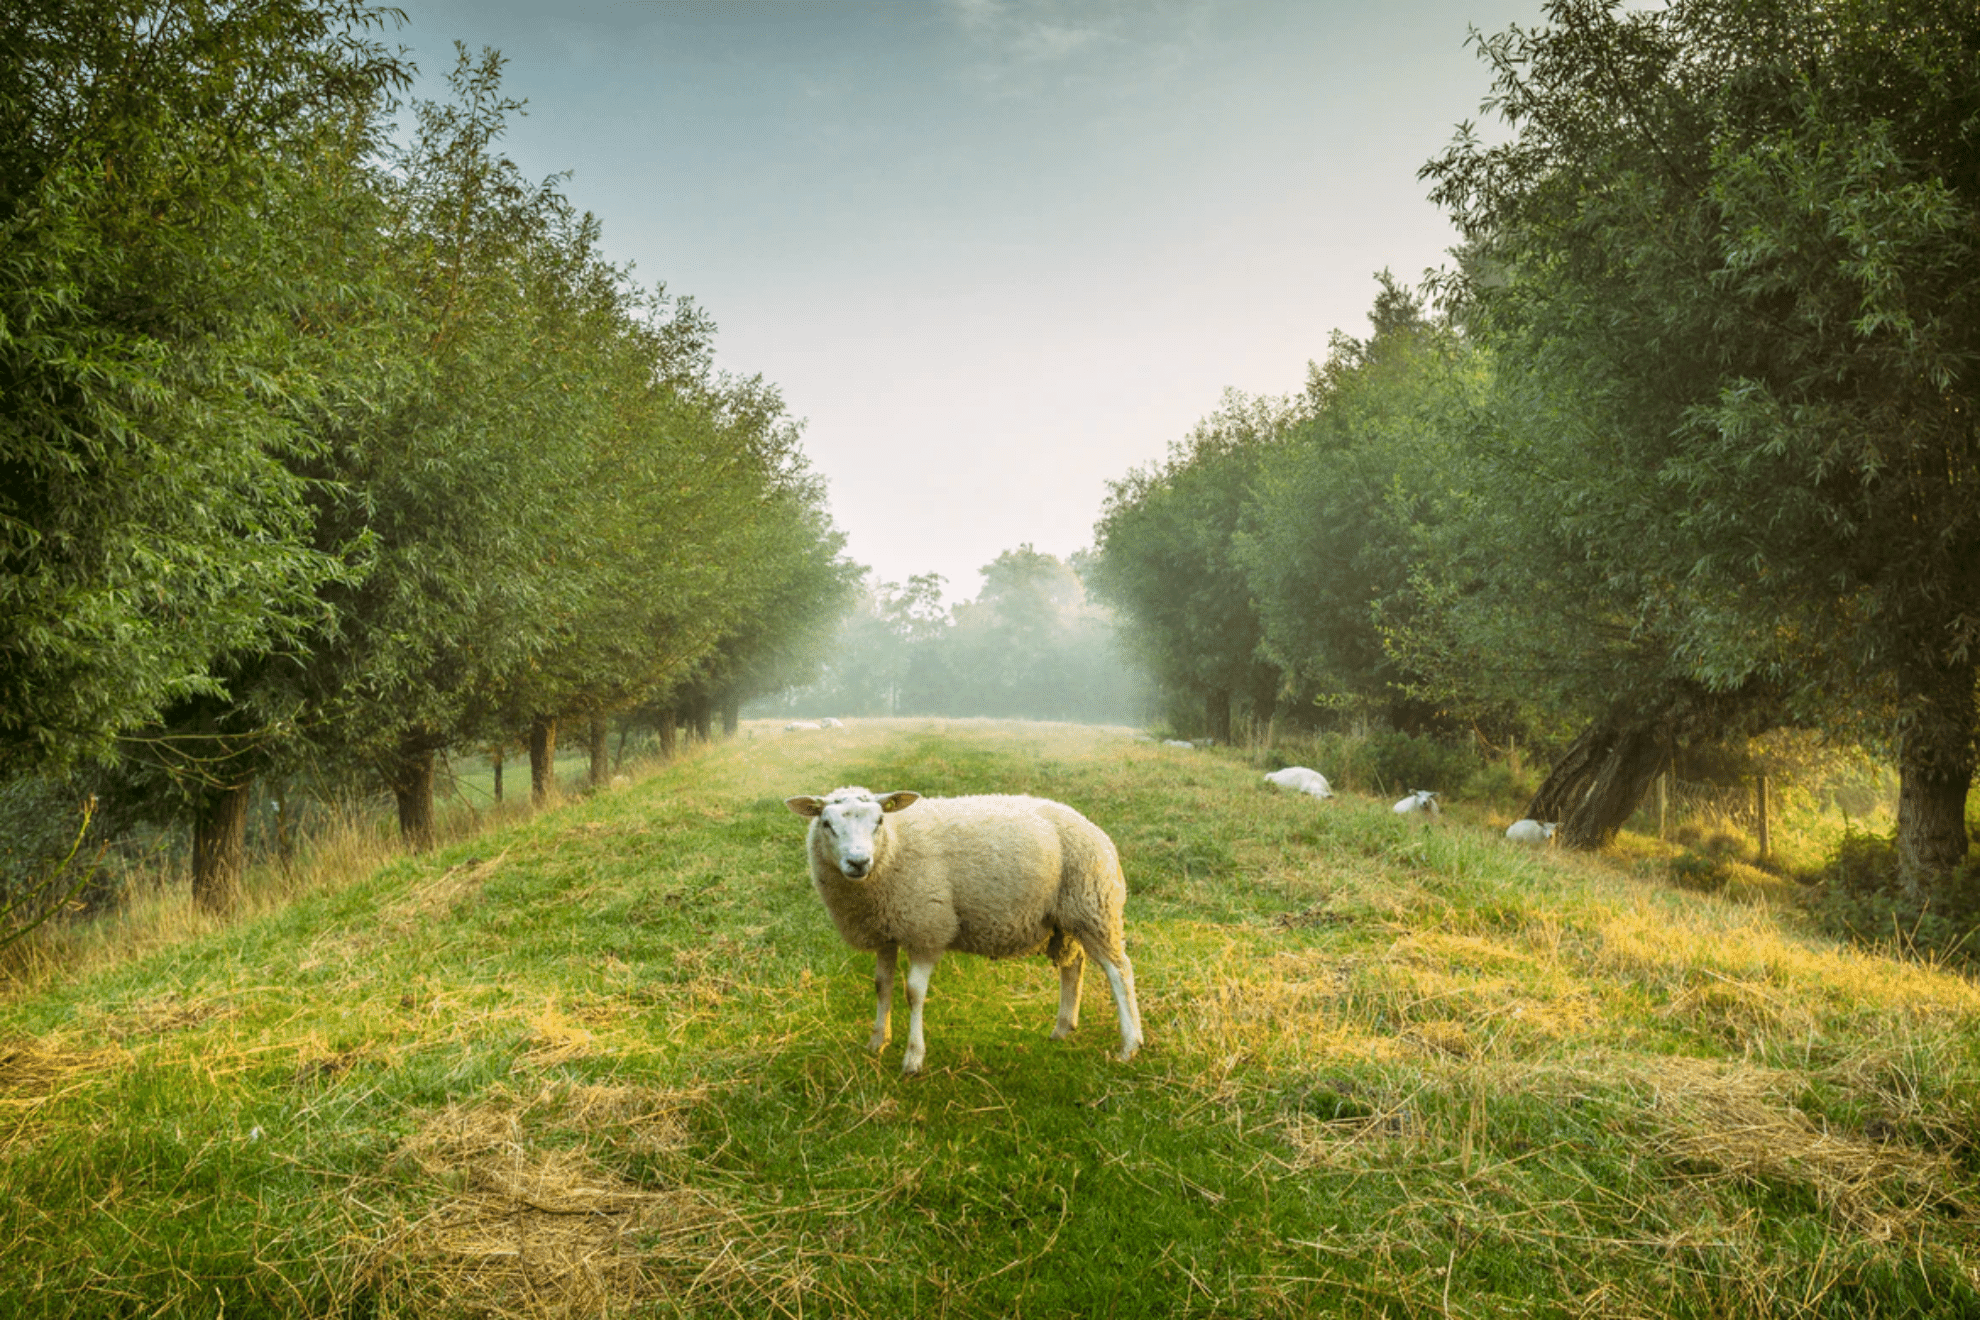 A white sheep is in the centre of the frame looking towards the camera. It is standing on grass in-between two rows of trees. A group of sheep can be seen in the background underneath the canopy of the trees.